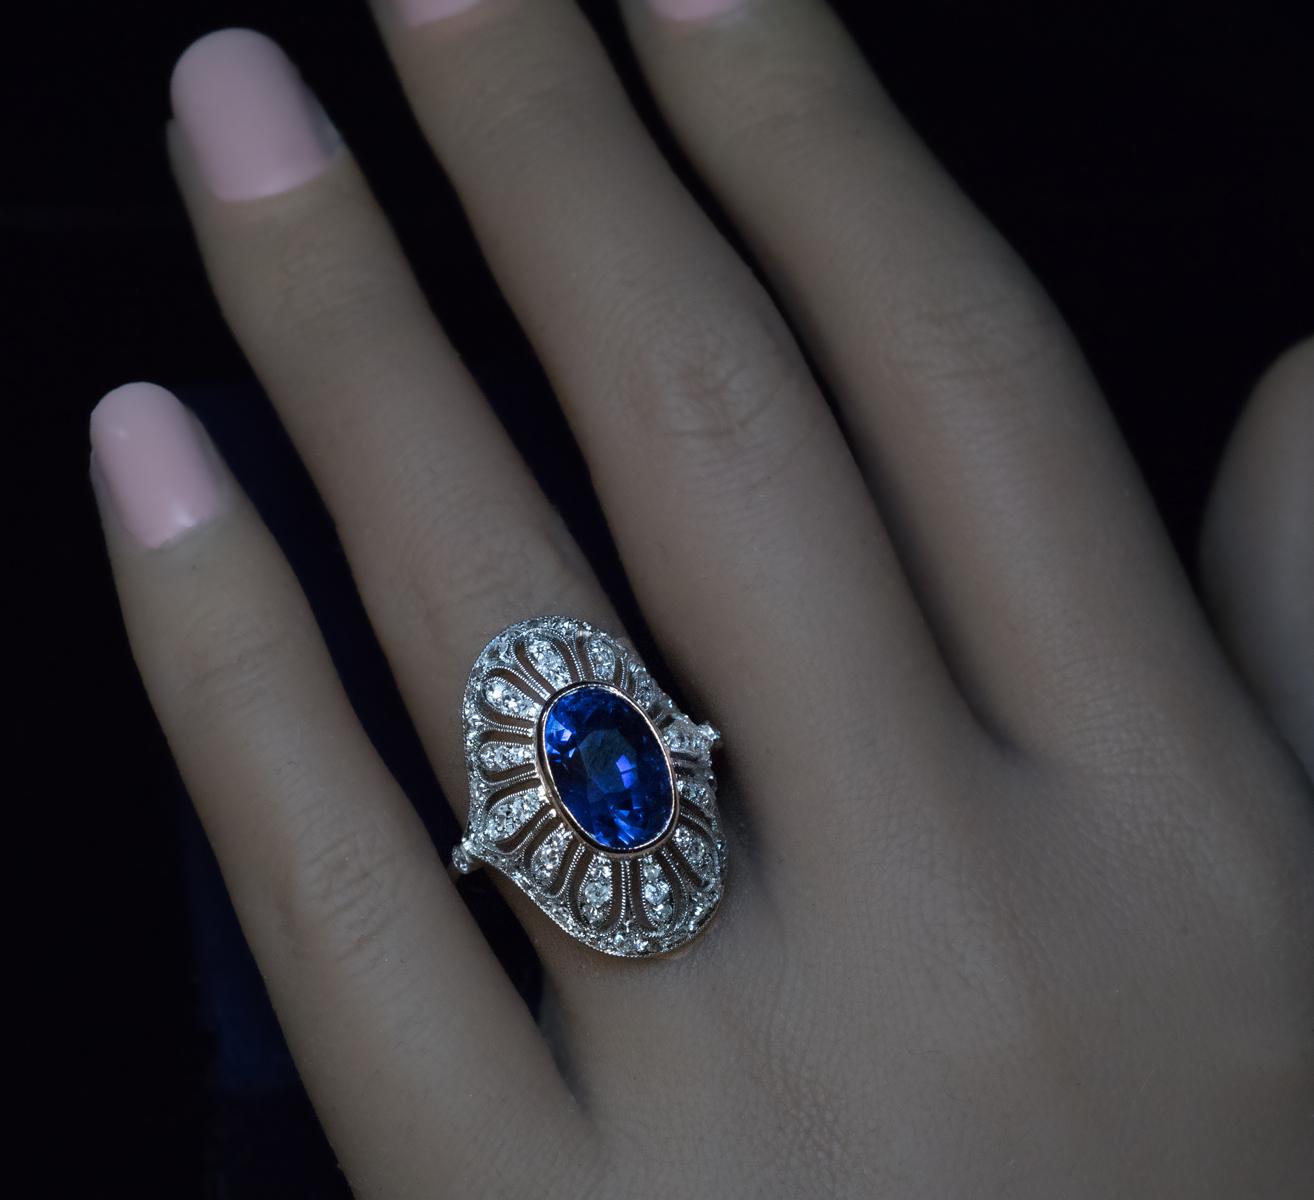 Made in Moscow in the 1930s.

This Art Deco era high dome openwork ring is finely crafted in platinum and gold. The ring is designed as a stylized oval flowerhead centered with a natural Ceylon sapphire of a vivid blue color. The sapphire has an